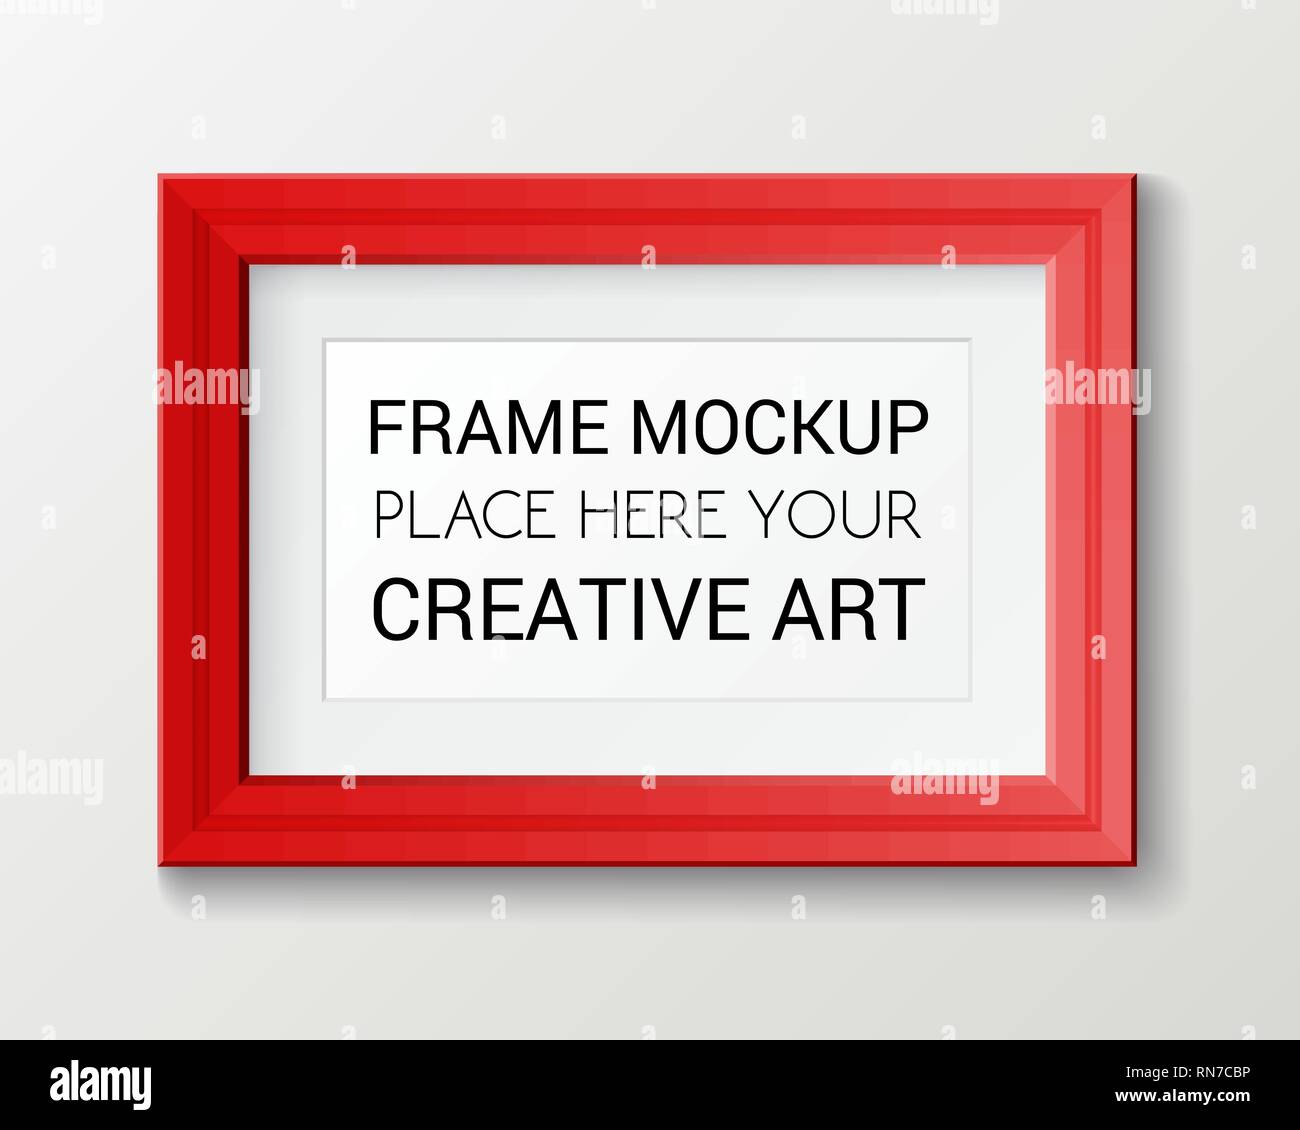 Realistic rectangular red frame template, frame on the wall mockup with decorative borders Stock Vector